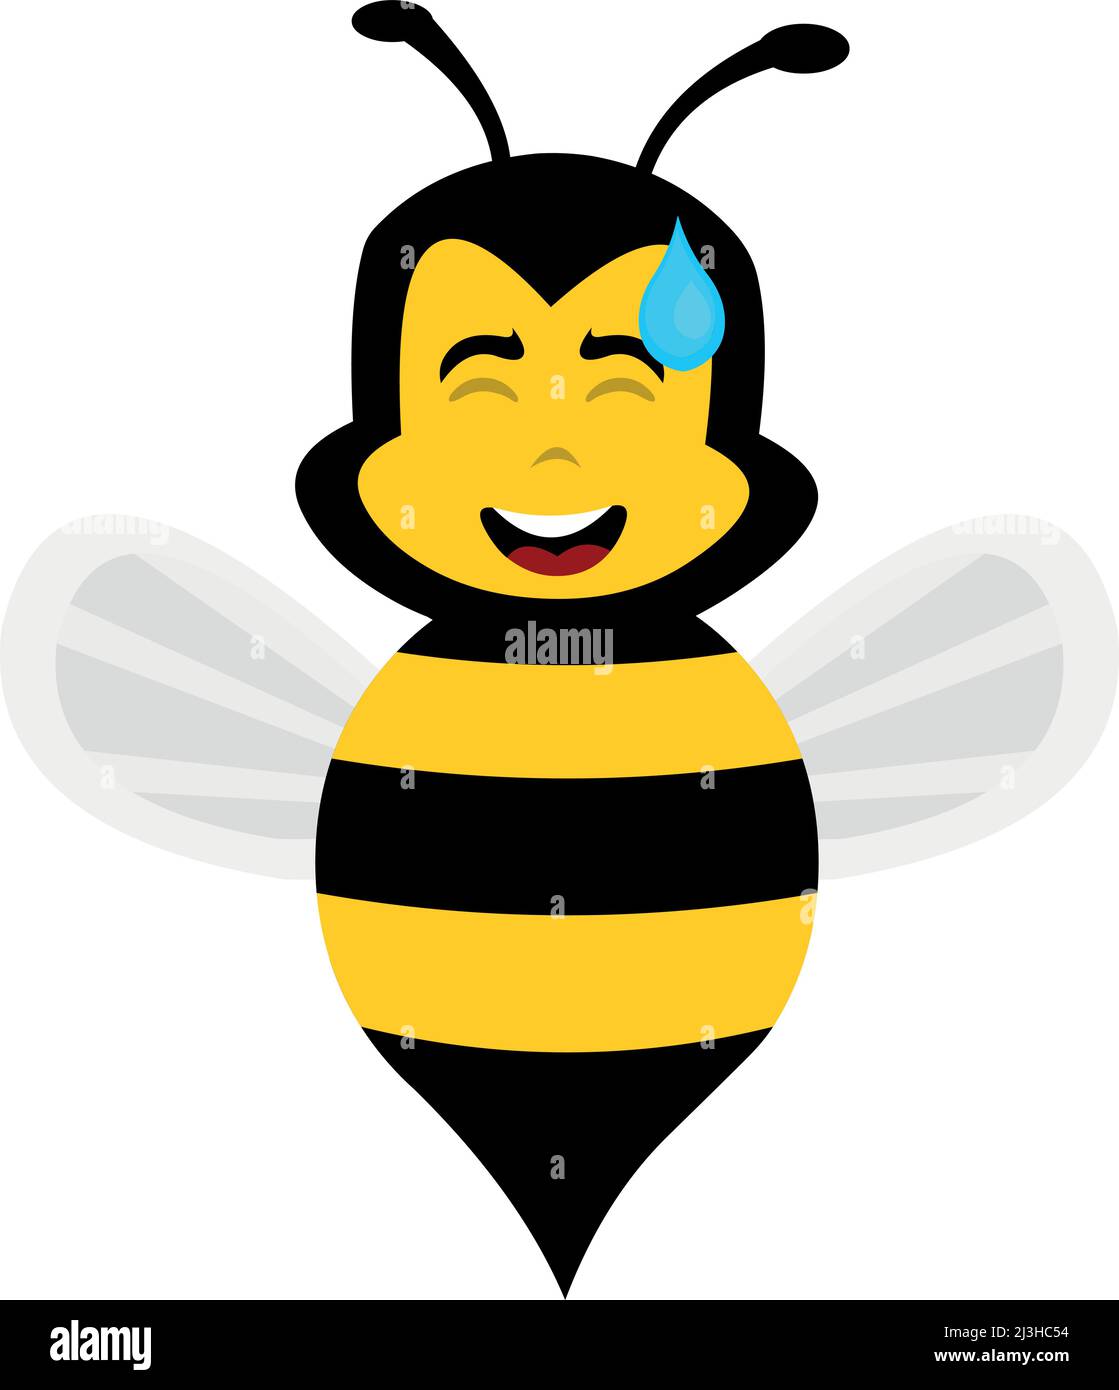 Vector illustration of a cartoon bee with an embarrassed expression and a drop of sweat on its head Stock Vector